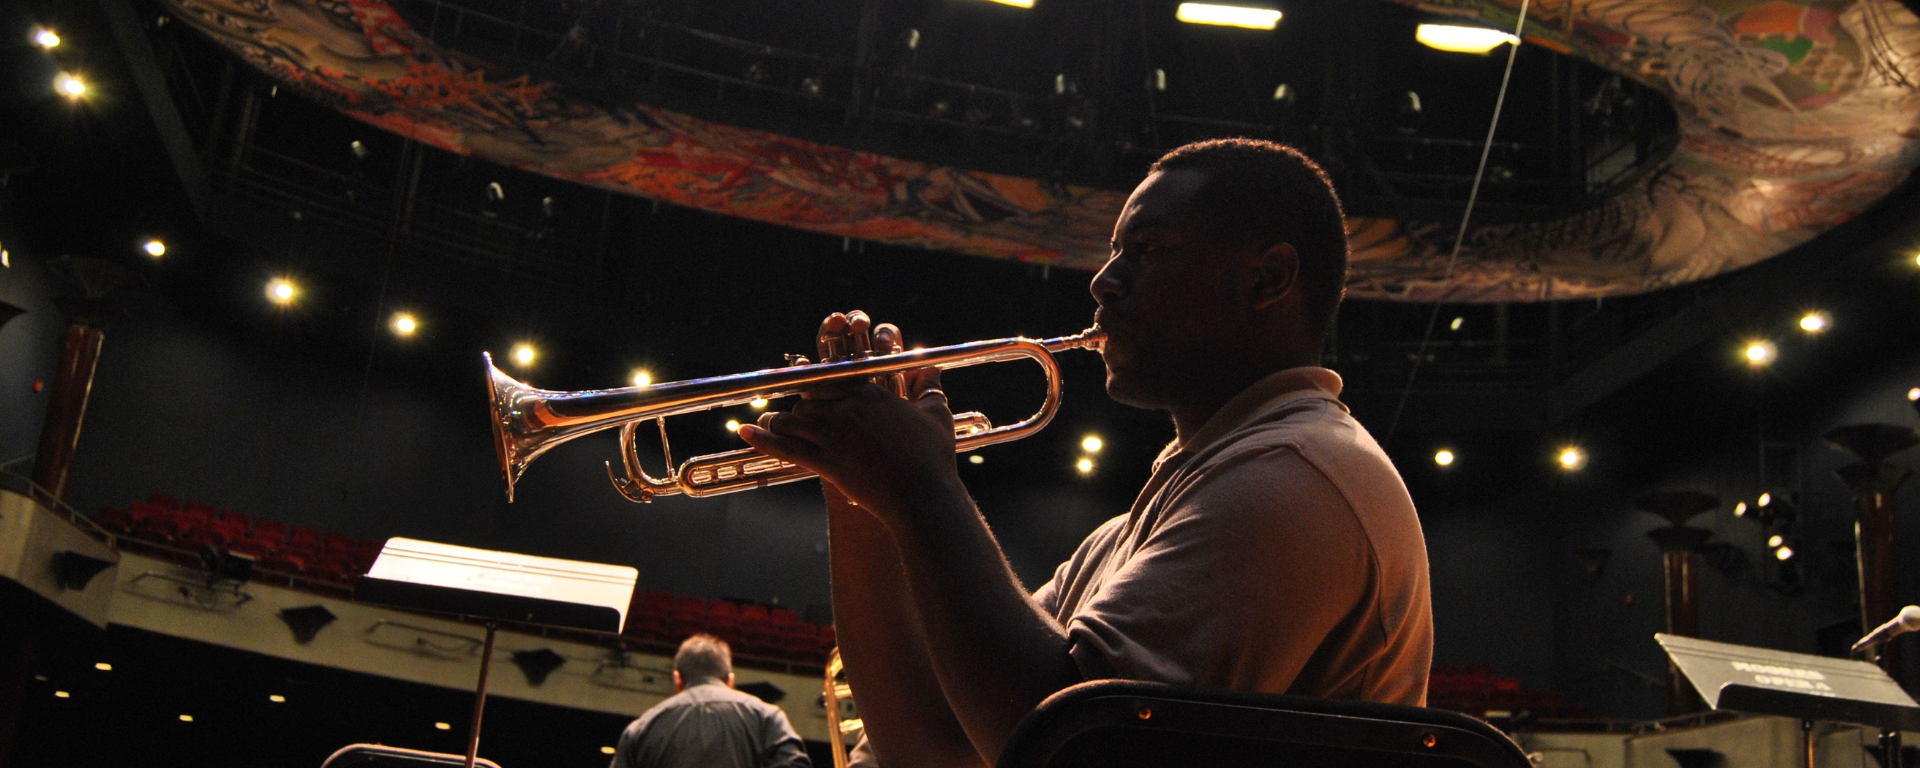 A trumpet player on the Moores Opera House stage